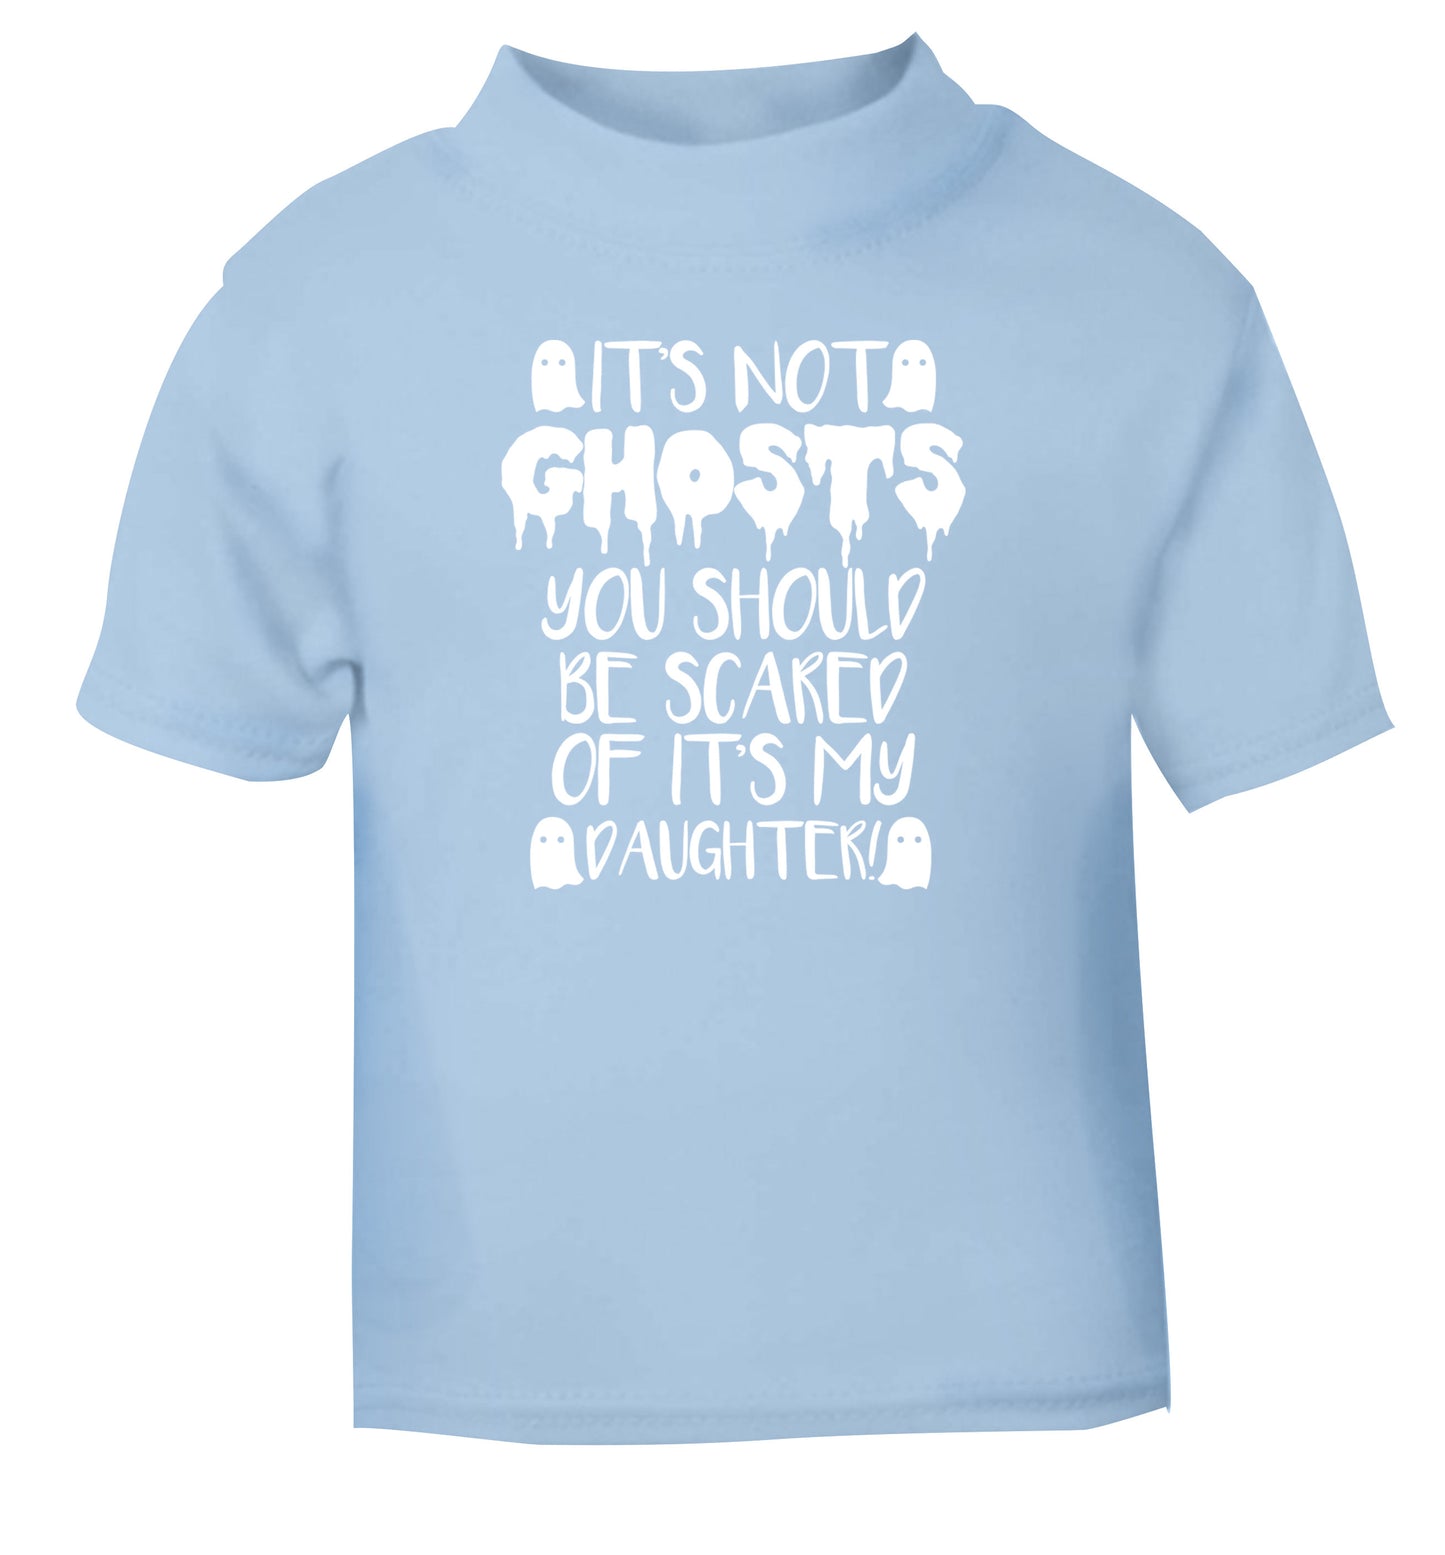 It's not ghosts you should be scared of it's my daughter! light blue Baby Toddler Tshirt 2 Years